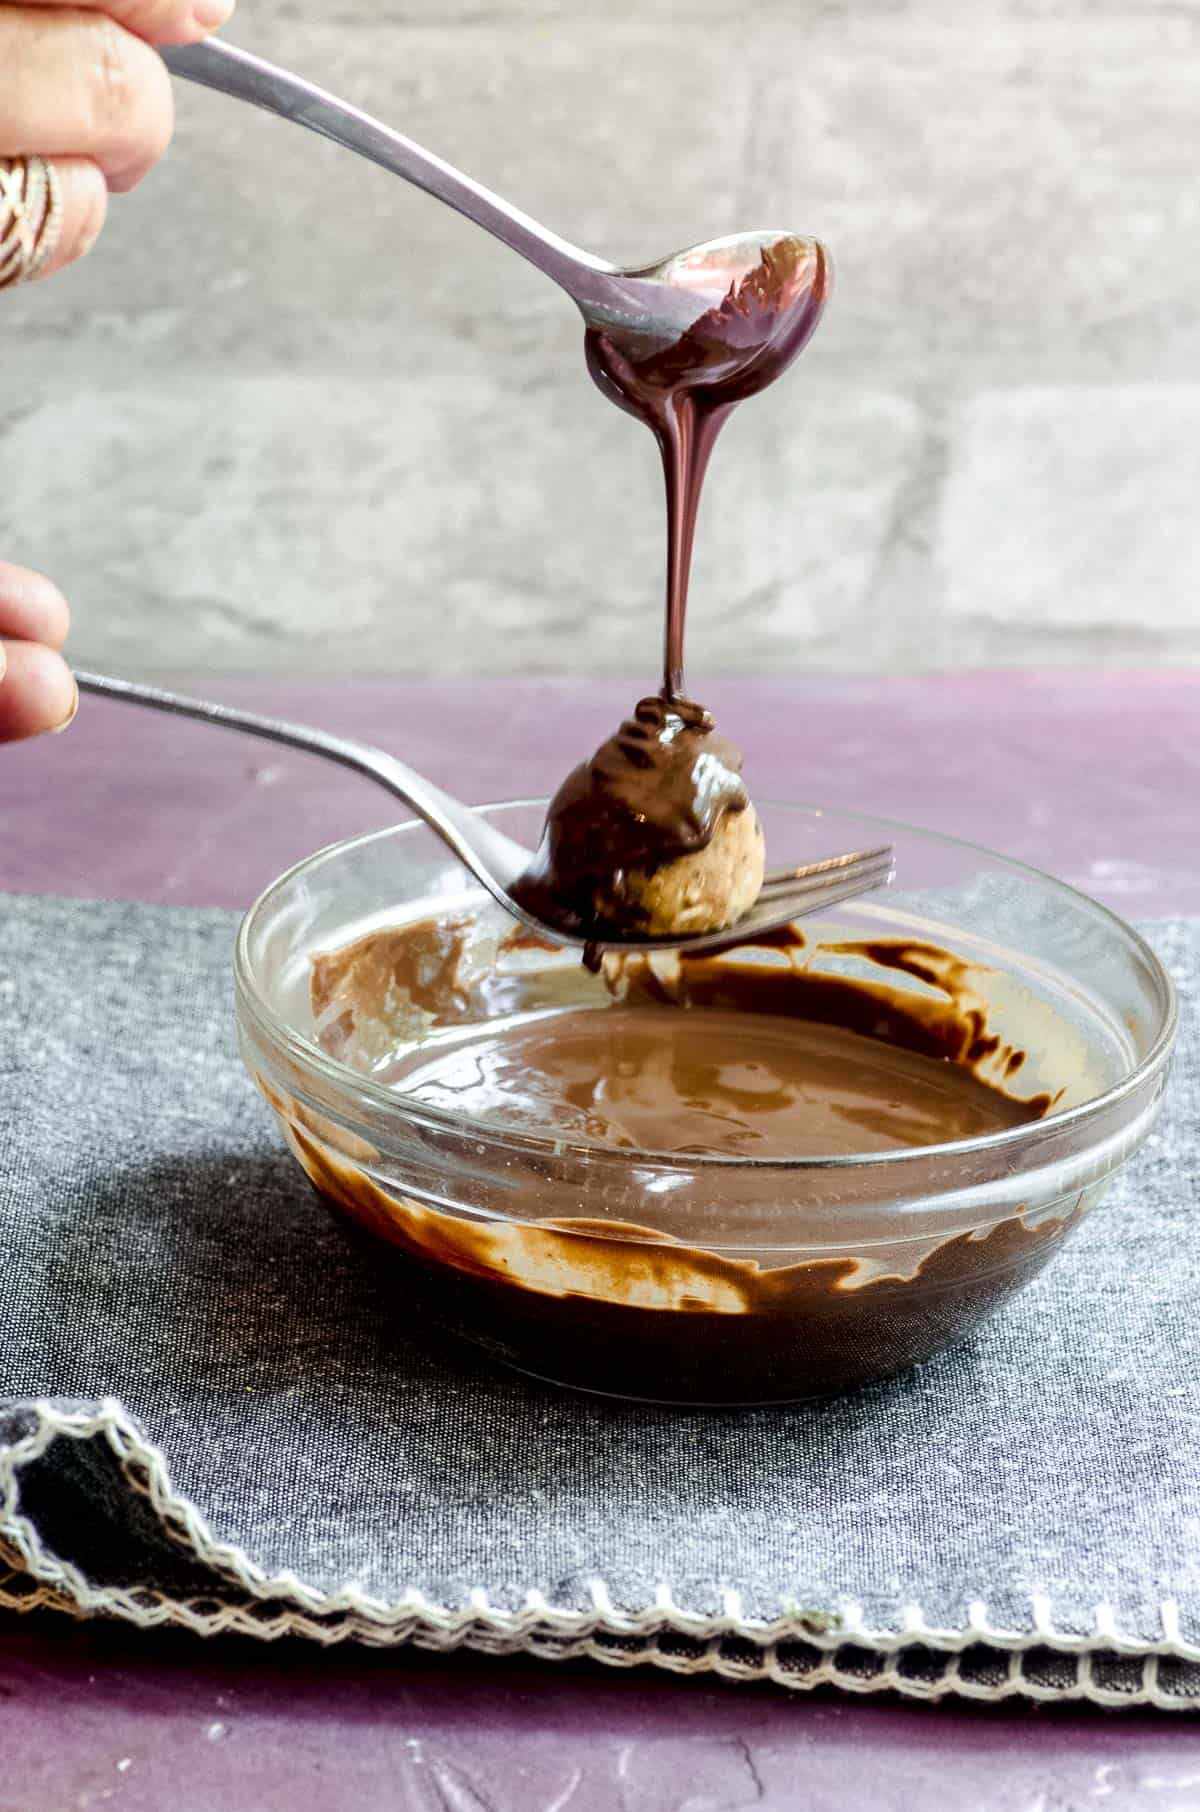 Pouring melted chocolate over a chickpea cookie dough balls